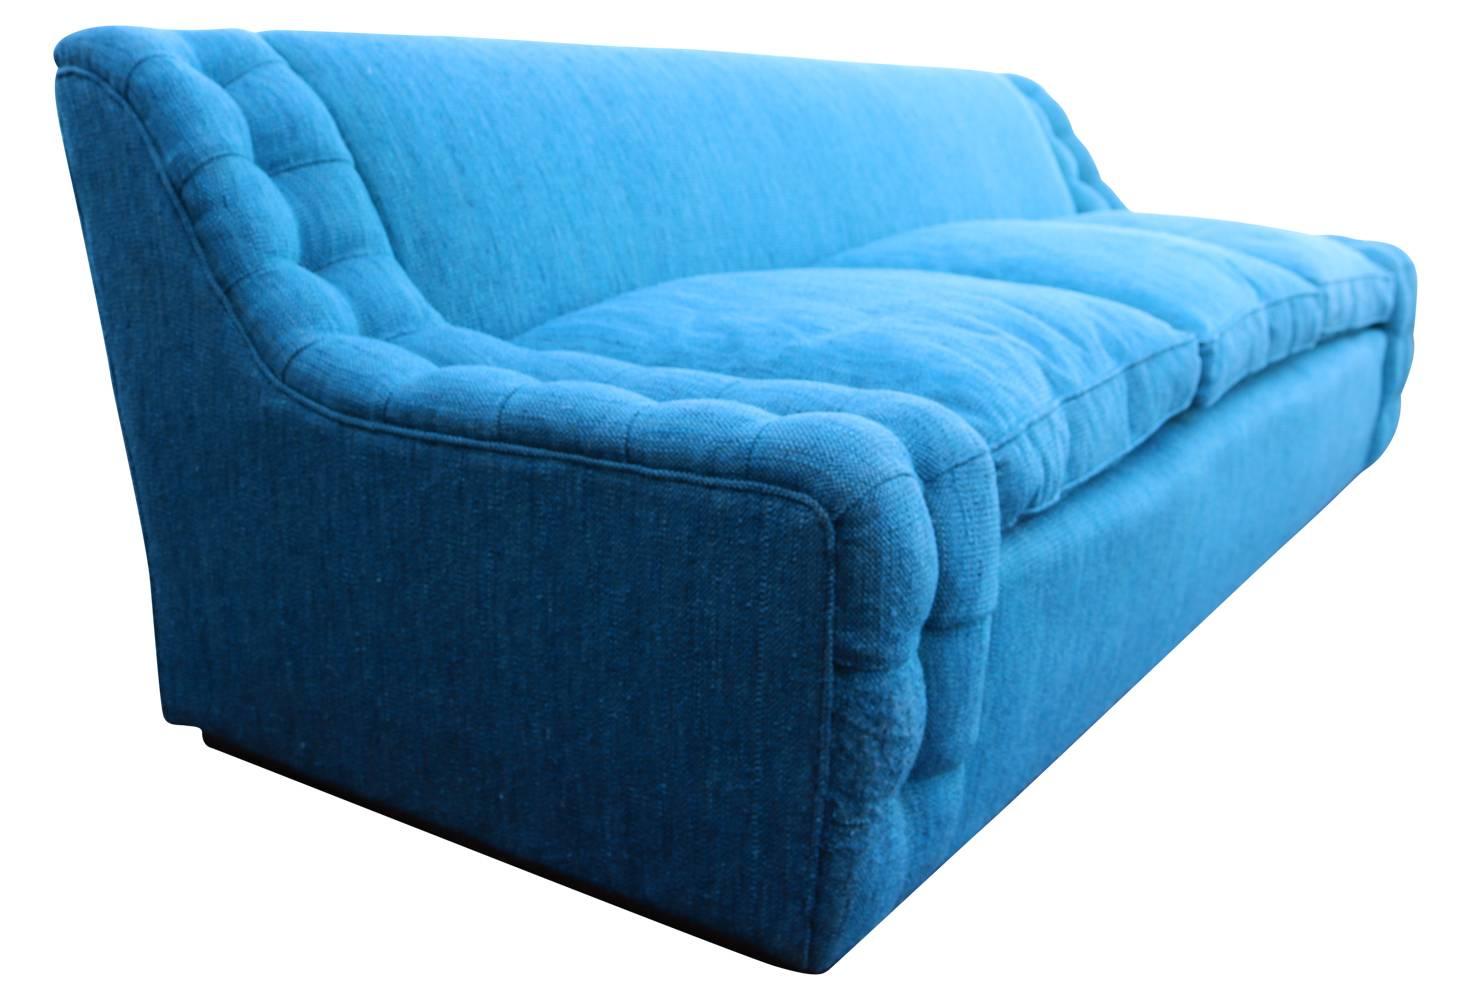 American Blue Plinth Based Sofa with Tufted Arms